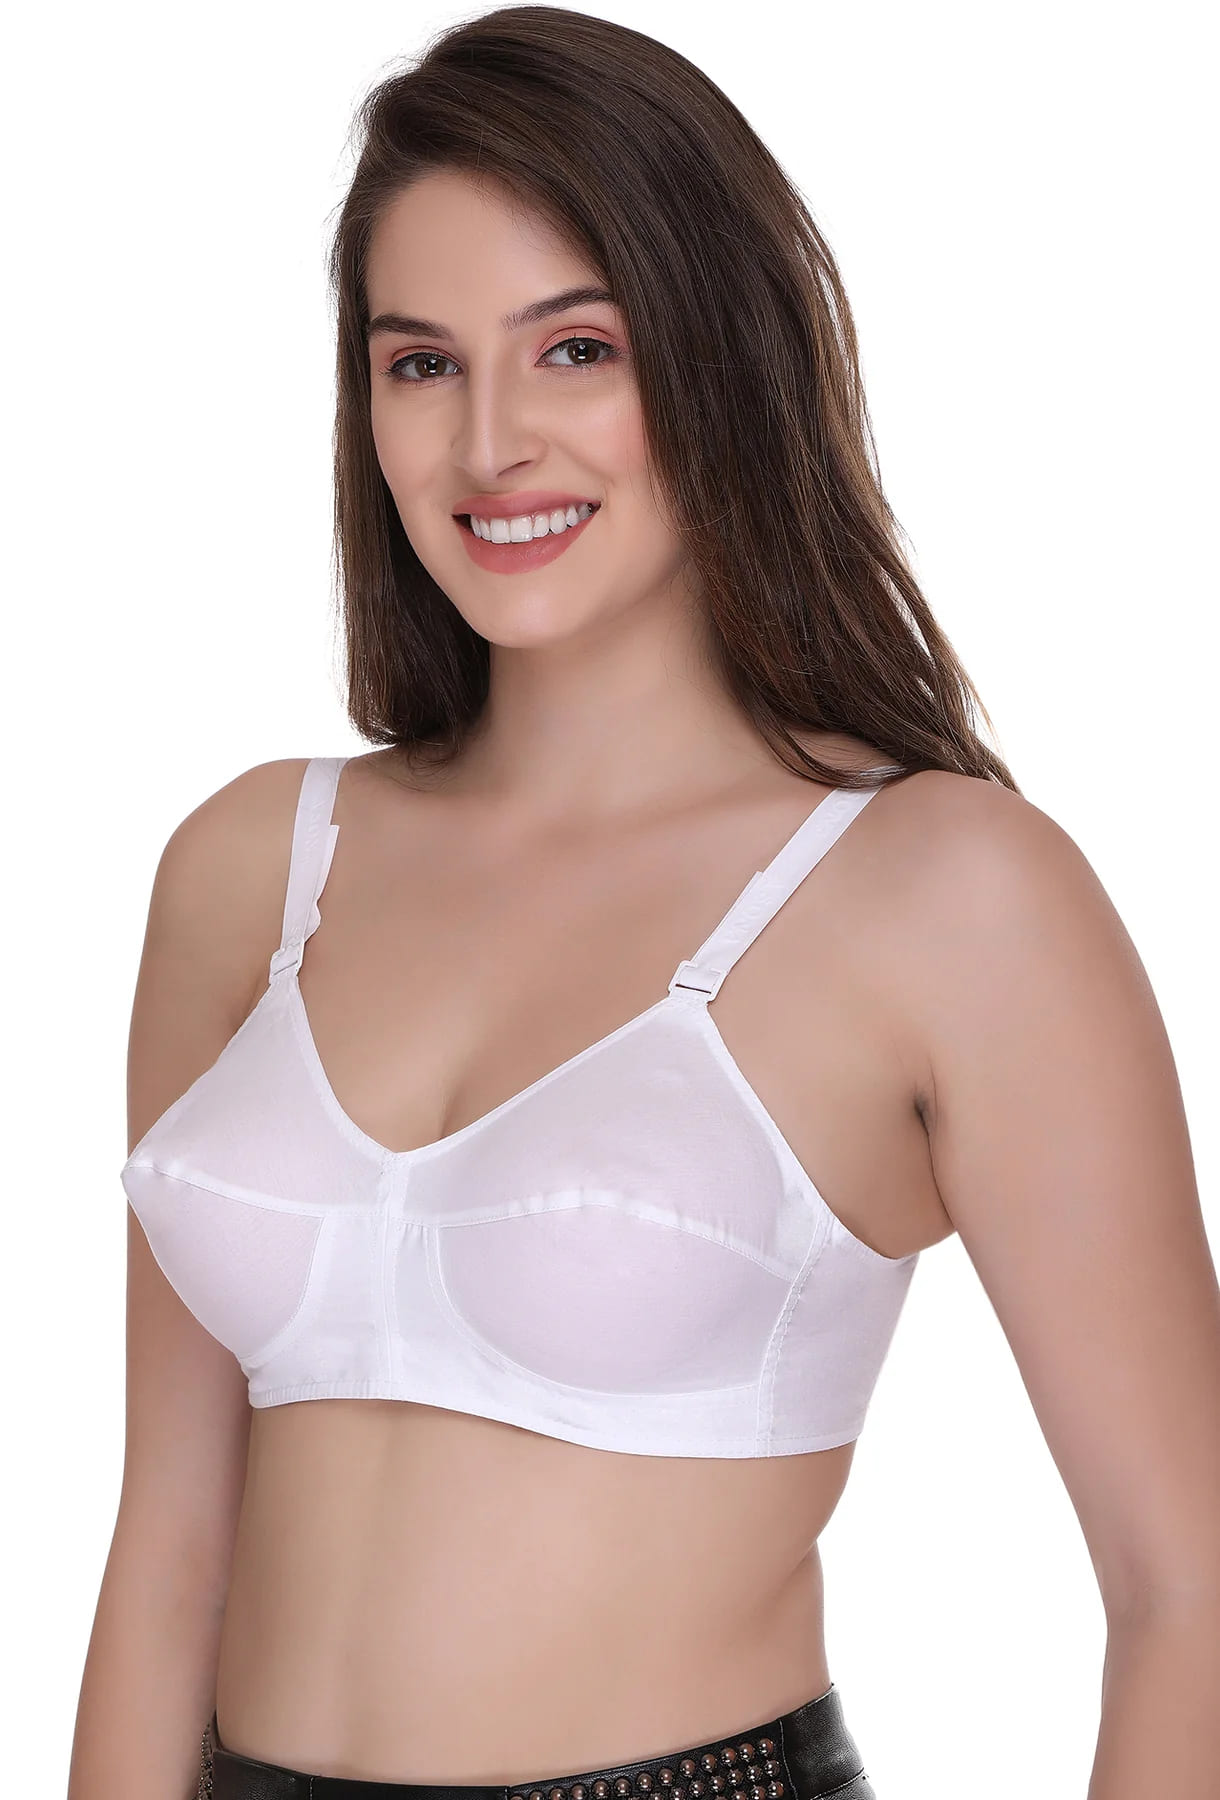 Buy women all type bra with Cotton Strap Online | Sonaebuy - Ghaziabad Clothing